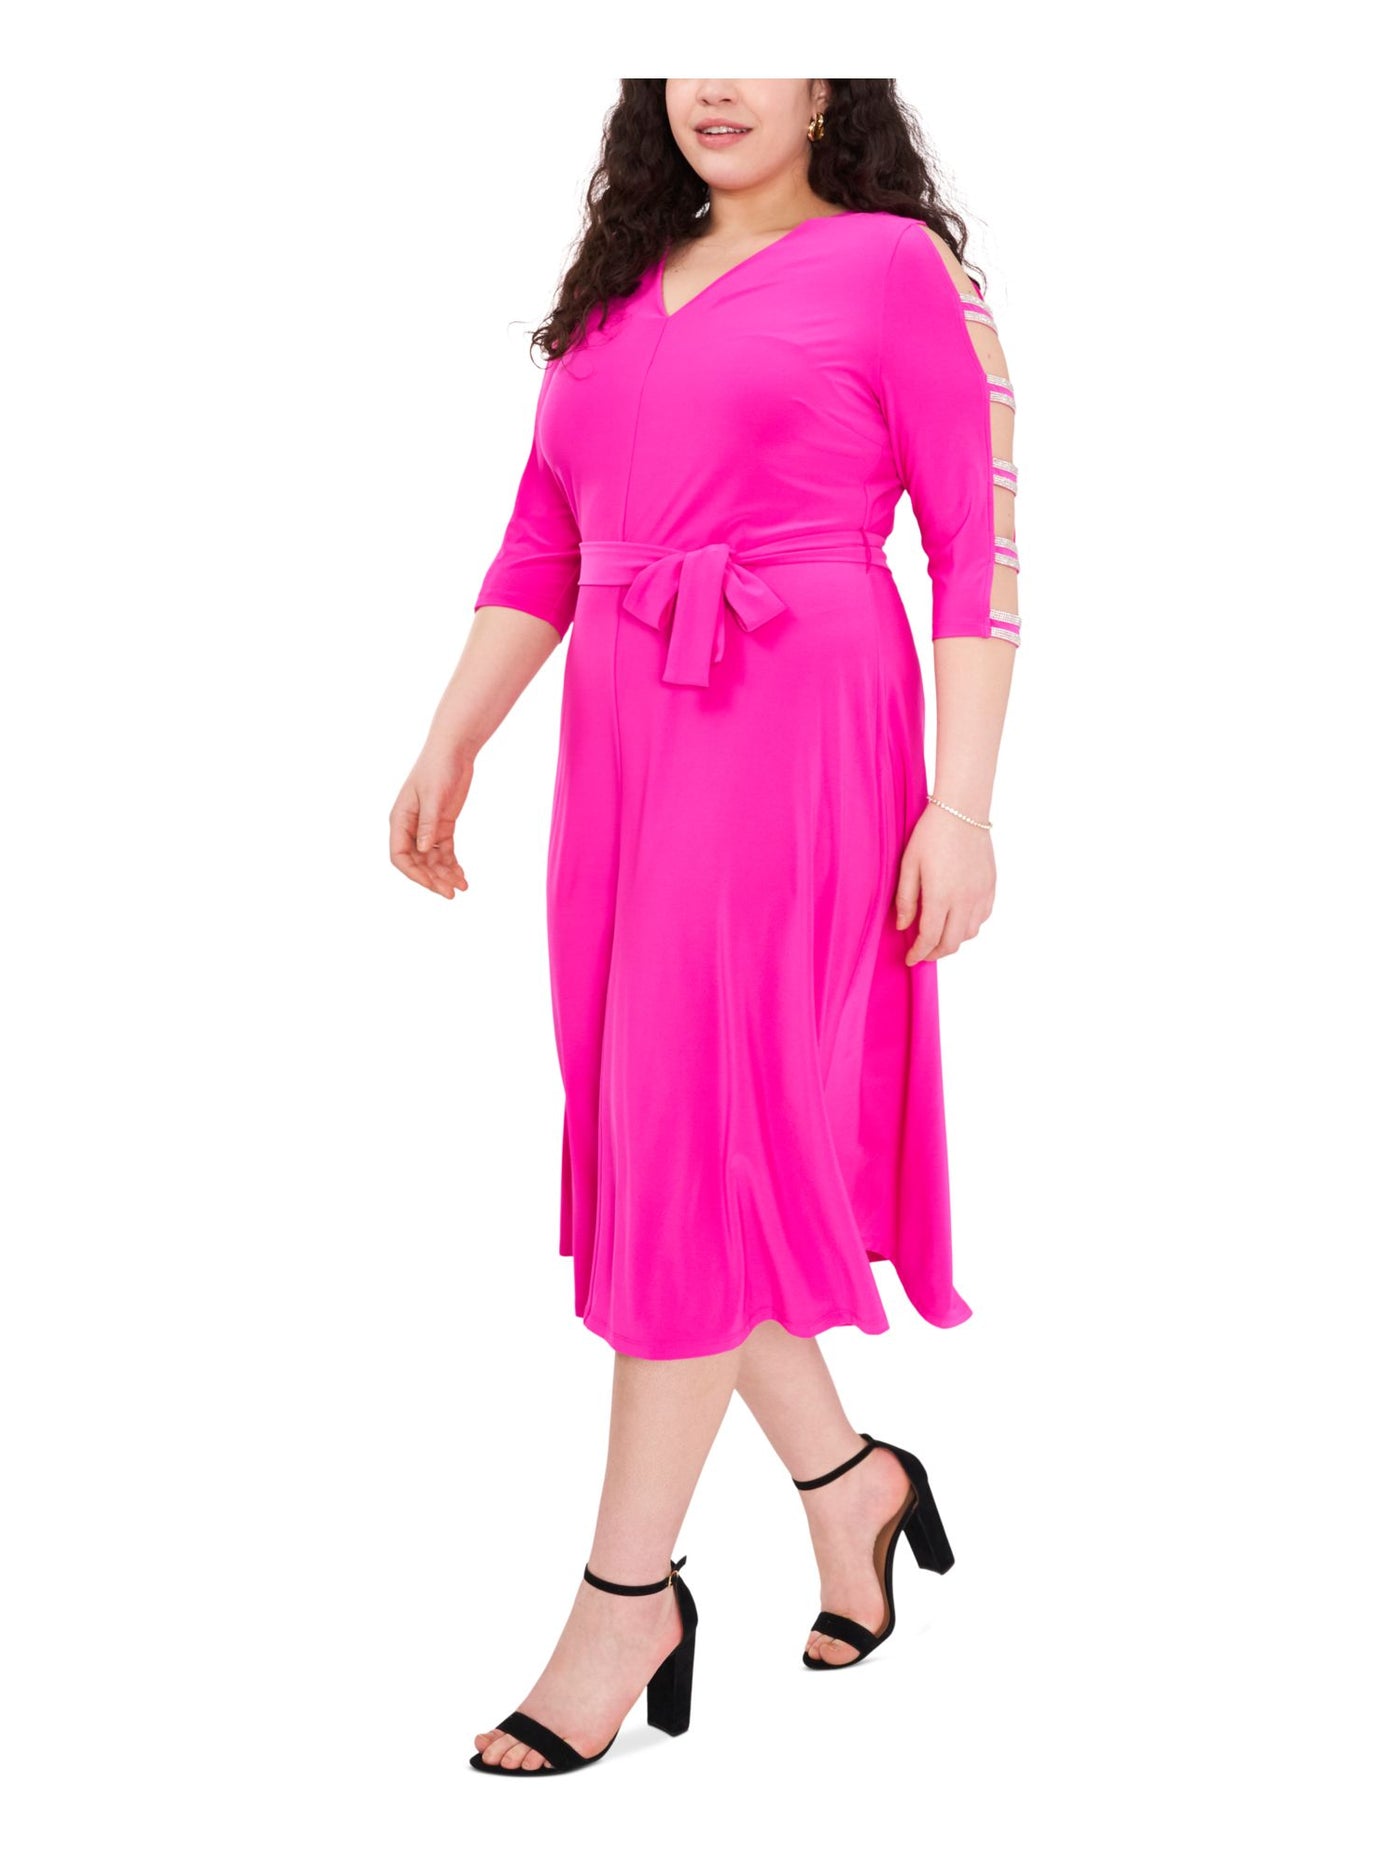 MSK Womens Pink Rhinestone Sheer Pullover Tie Belt Cutout Darted 3/4 Sleeve V Neck Midi Cocktail Fit + Flare Dress Plus 1X